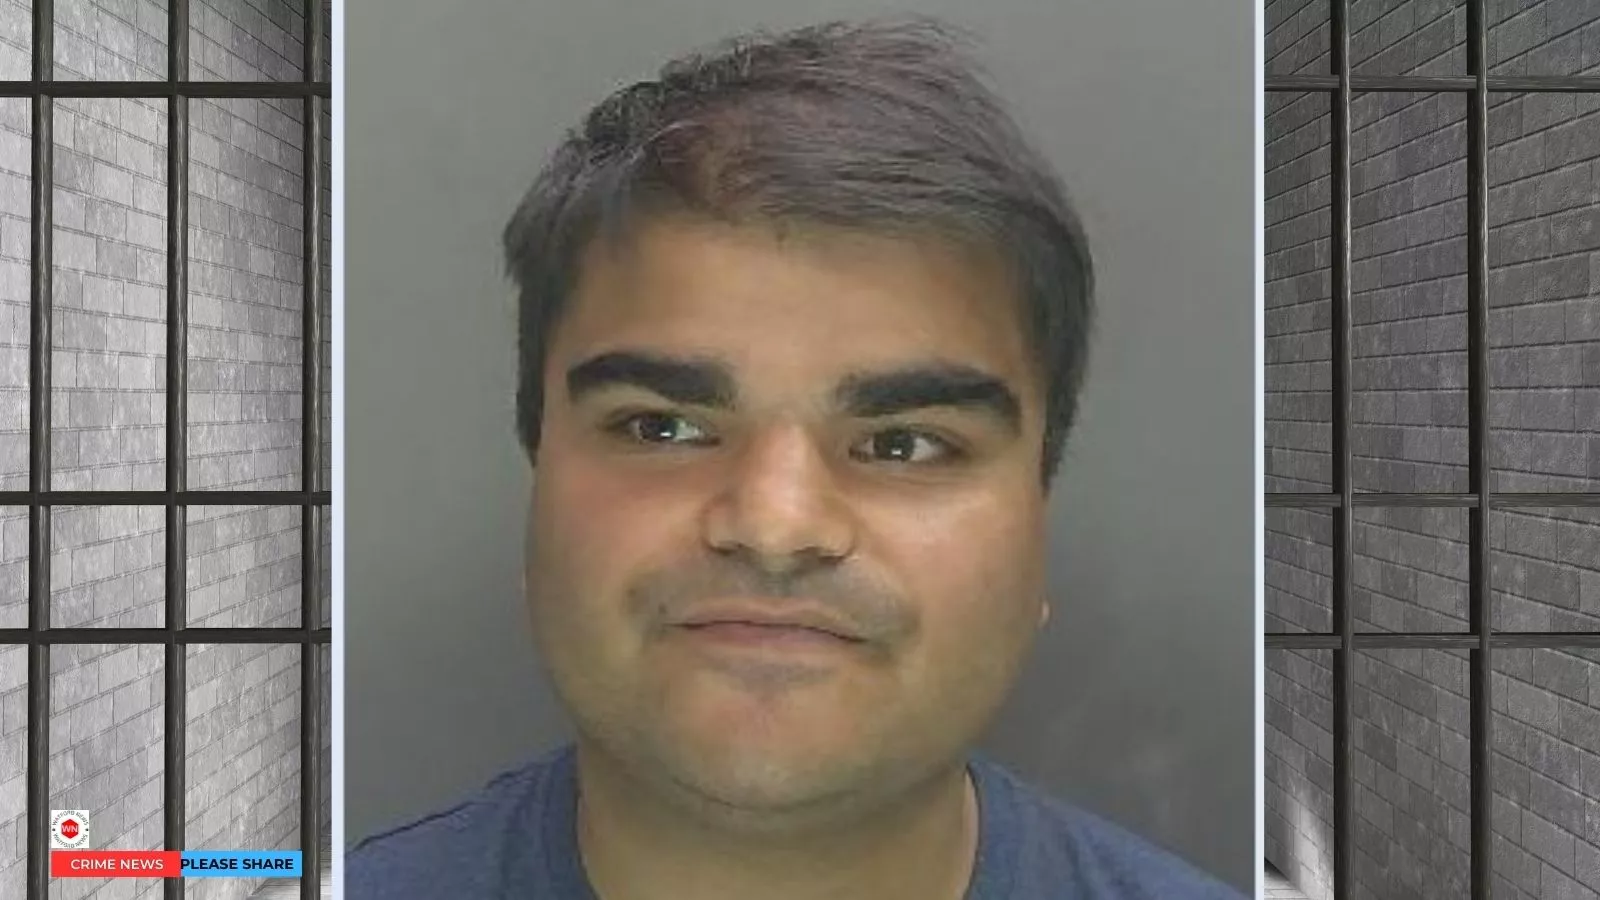 Watford Man Jailed for Targeting Girls as Young as 11 in Sexual Exploitation Case